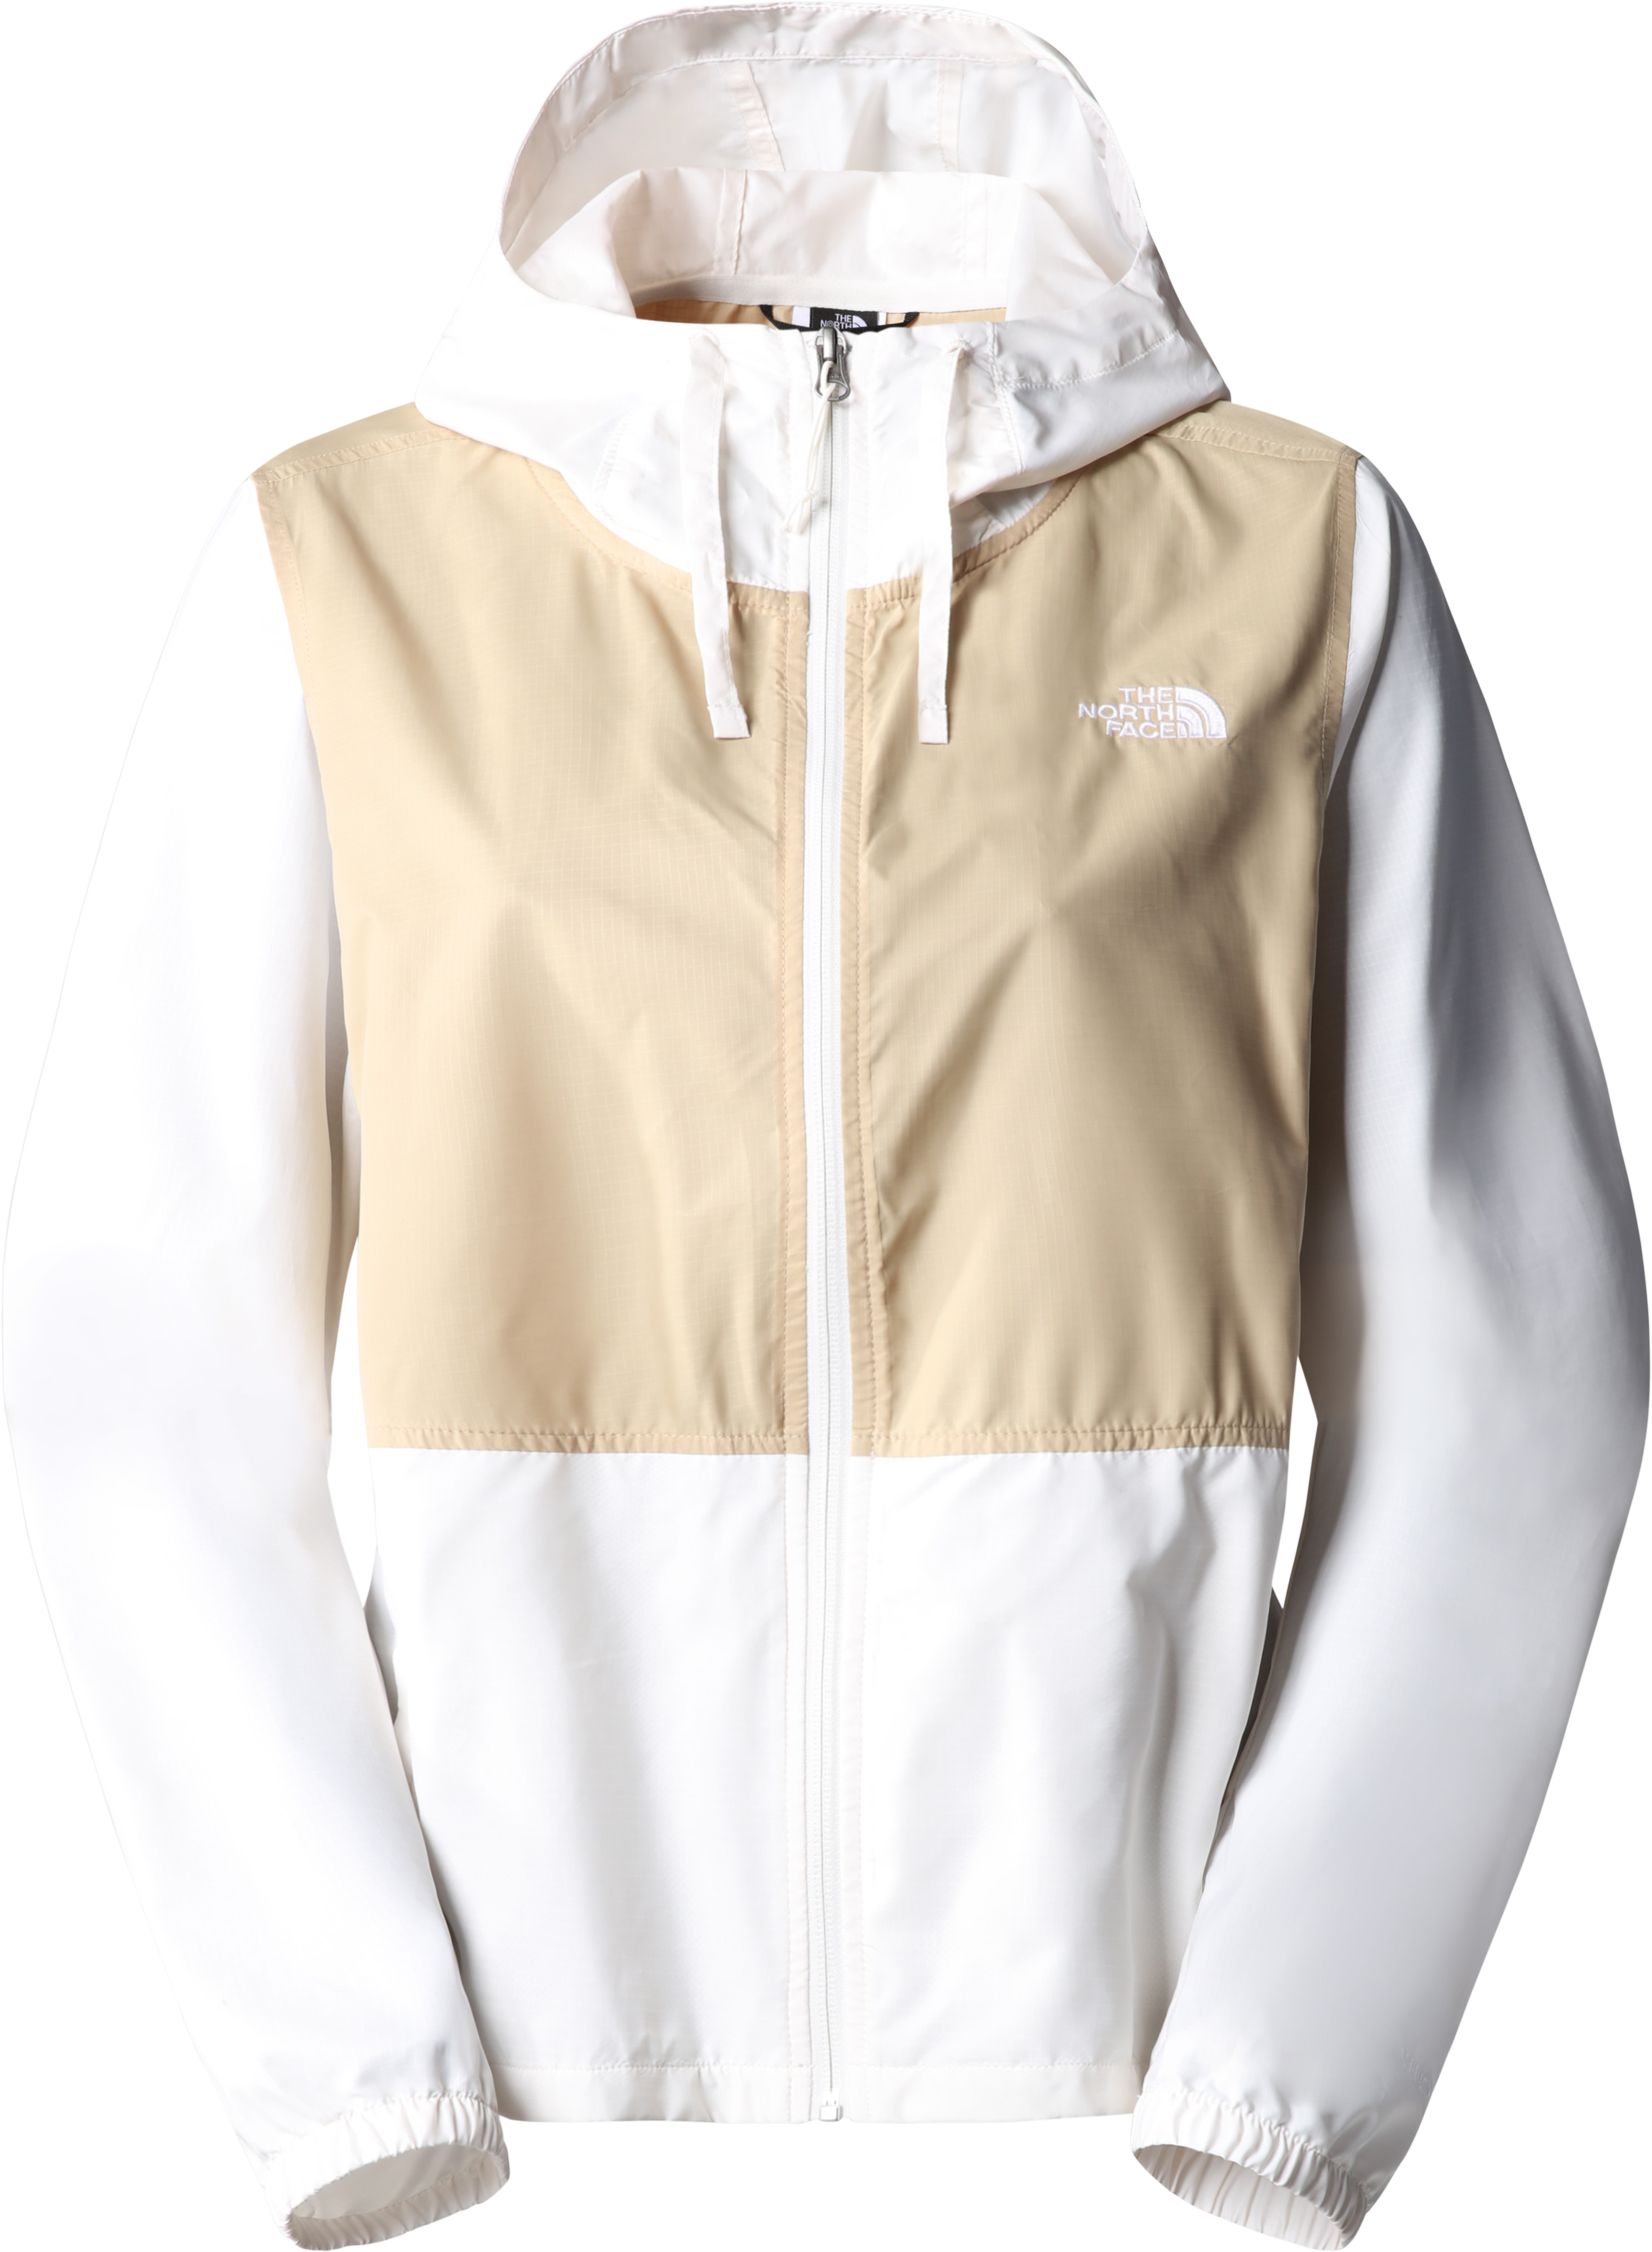 THE NORTH FACE, W CYCLONE JACKET 3